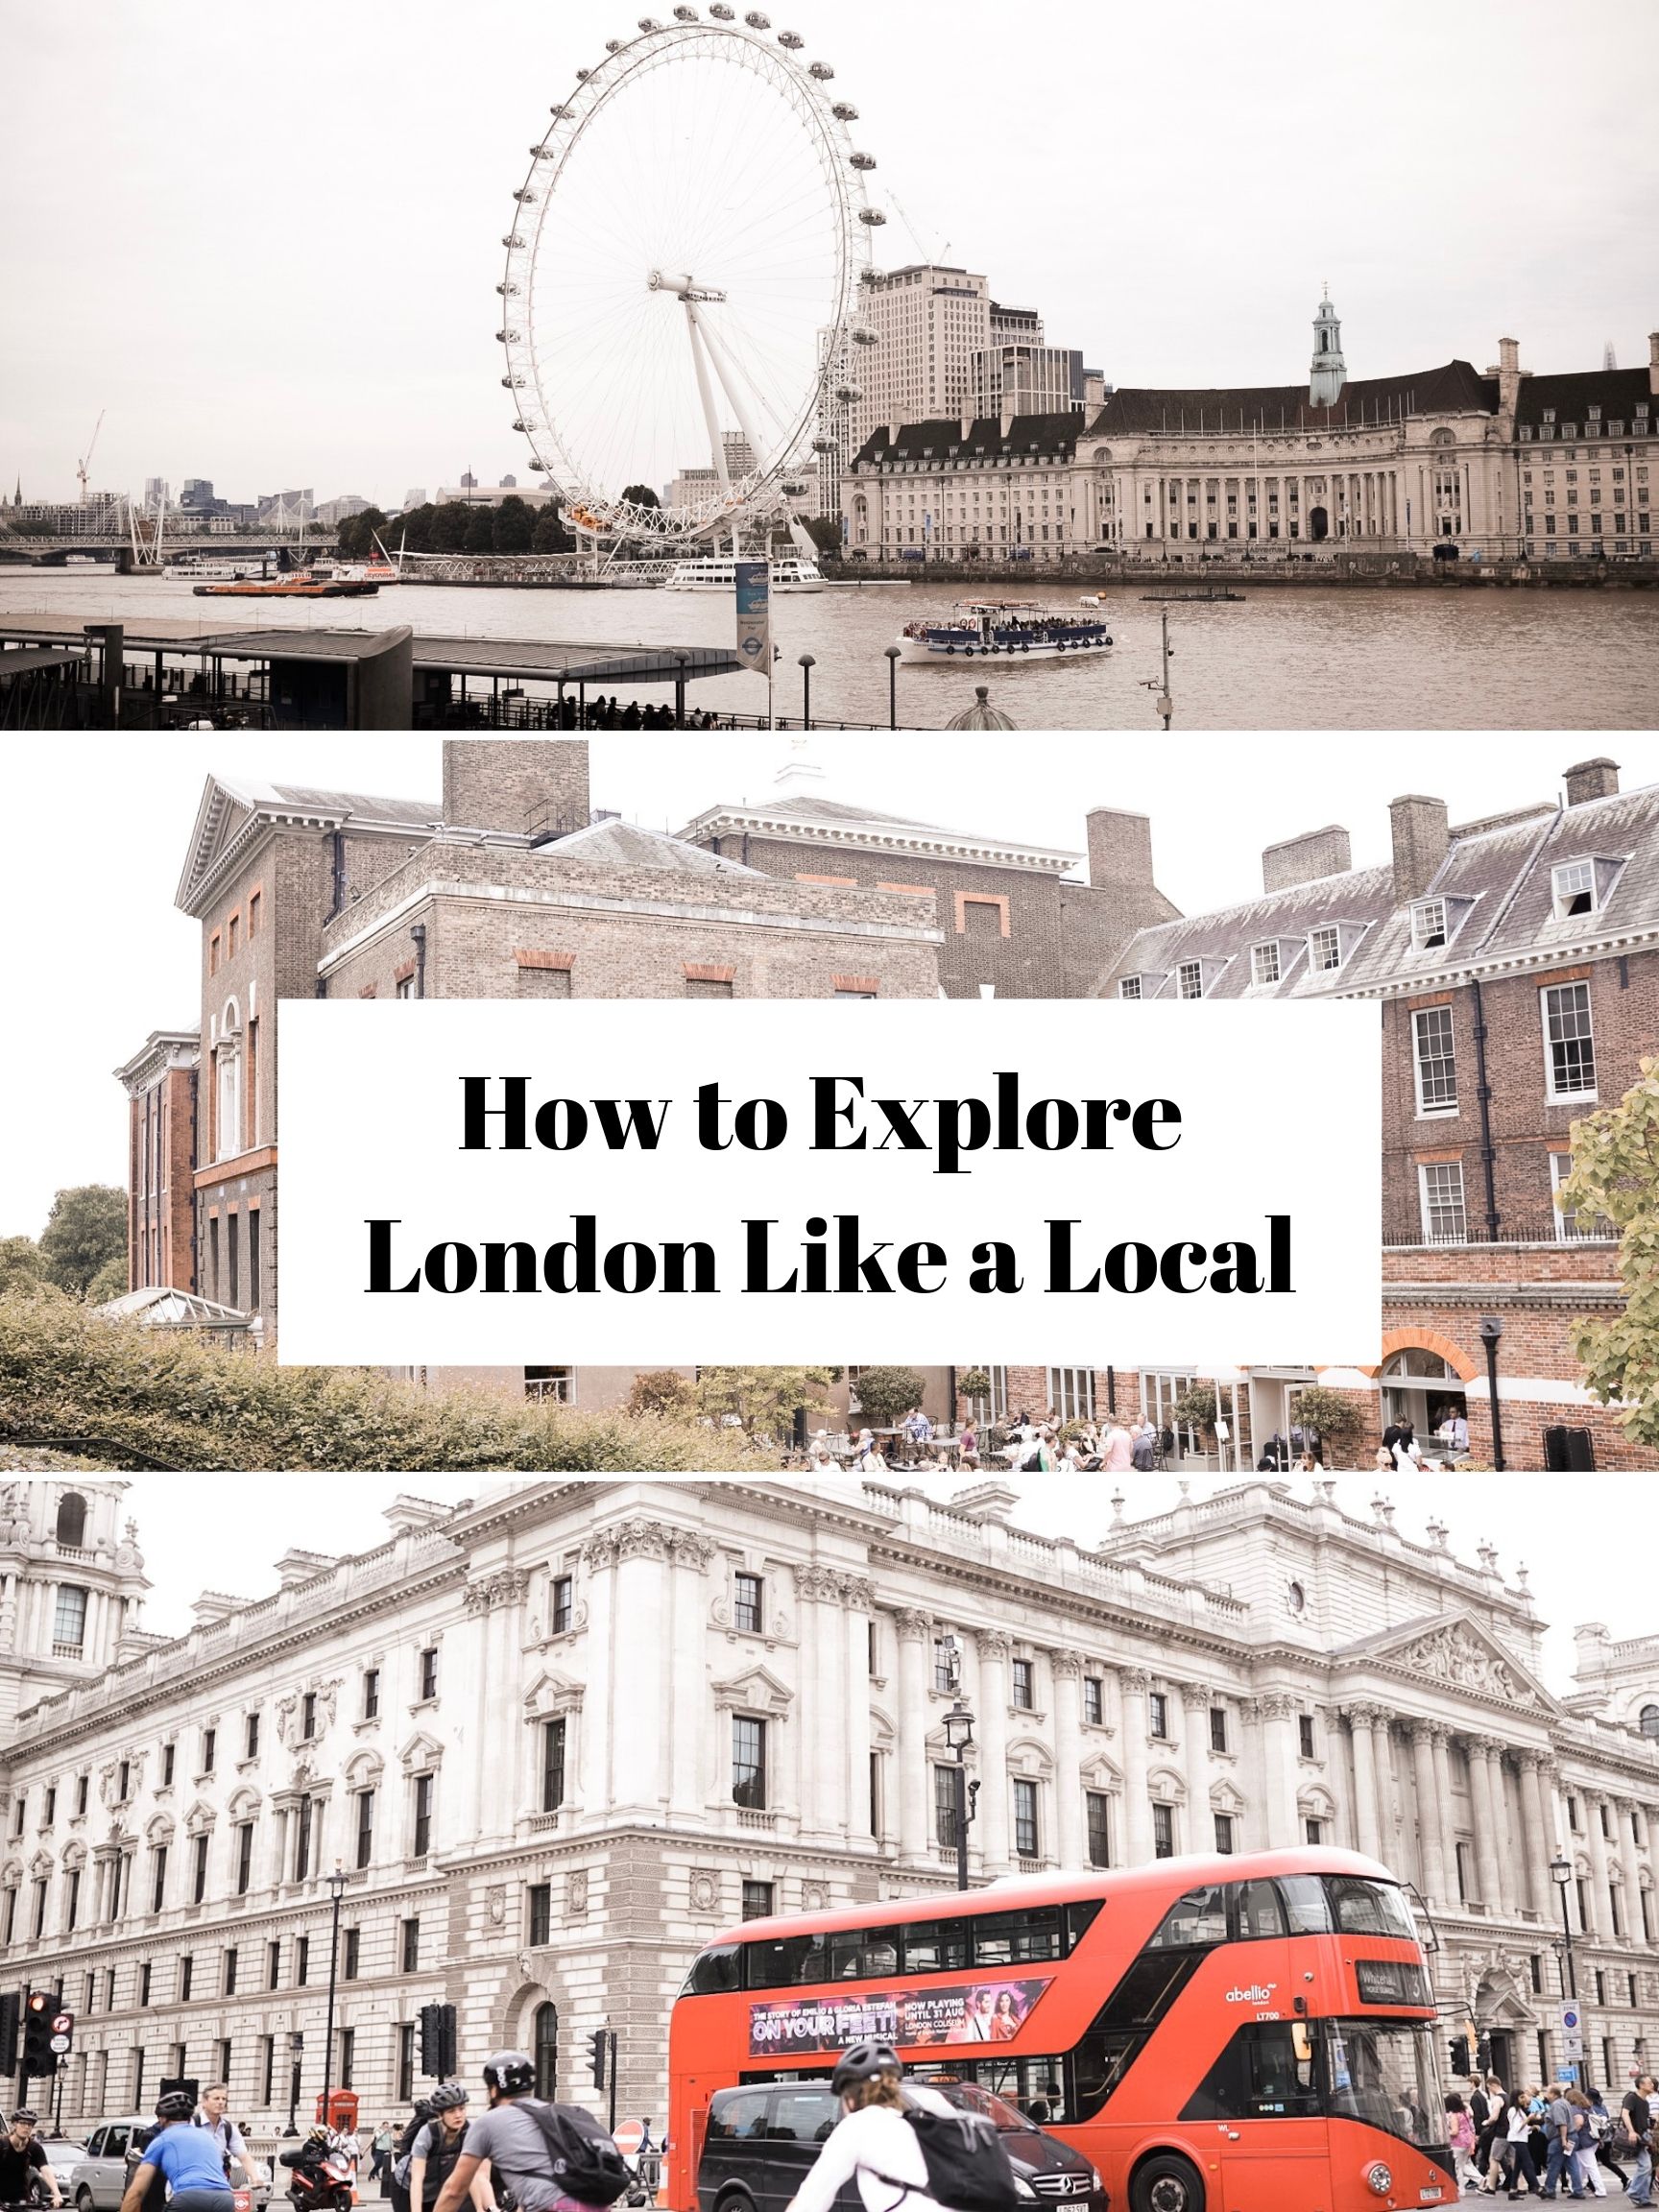 How to Explore London like a Local Tour Guide Places to See Thames River Parliament Westminister Abbey Big Ben London Eye Faiza Inam Travels SincerelyHumble 1 0